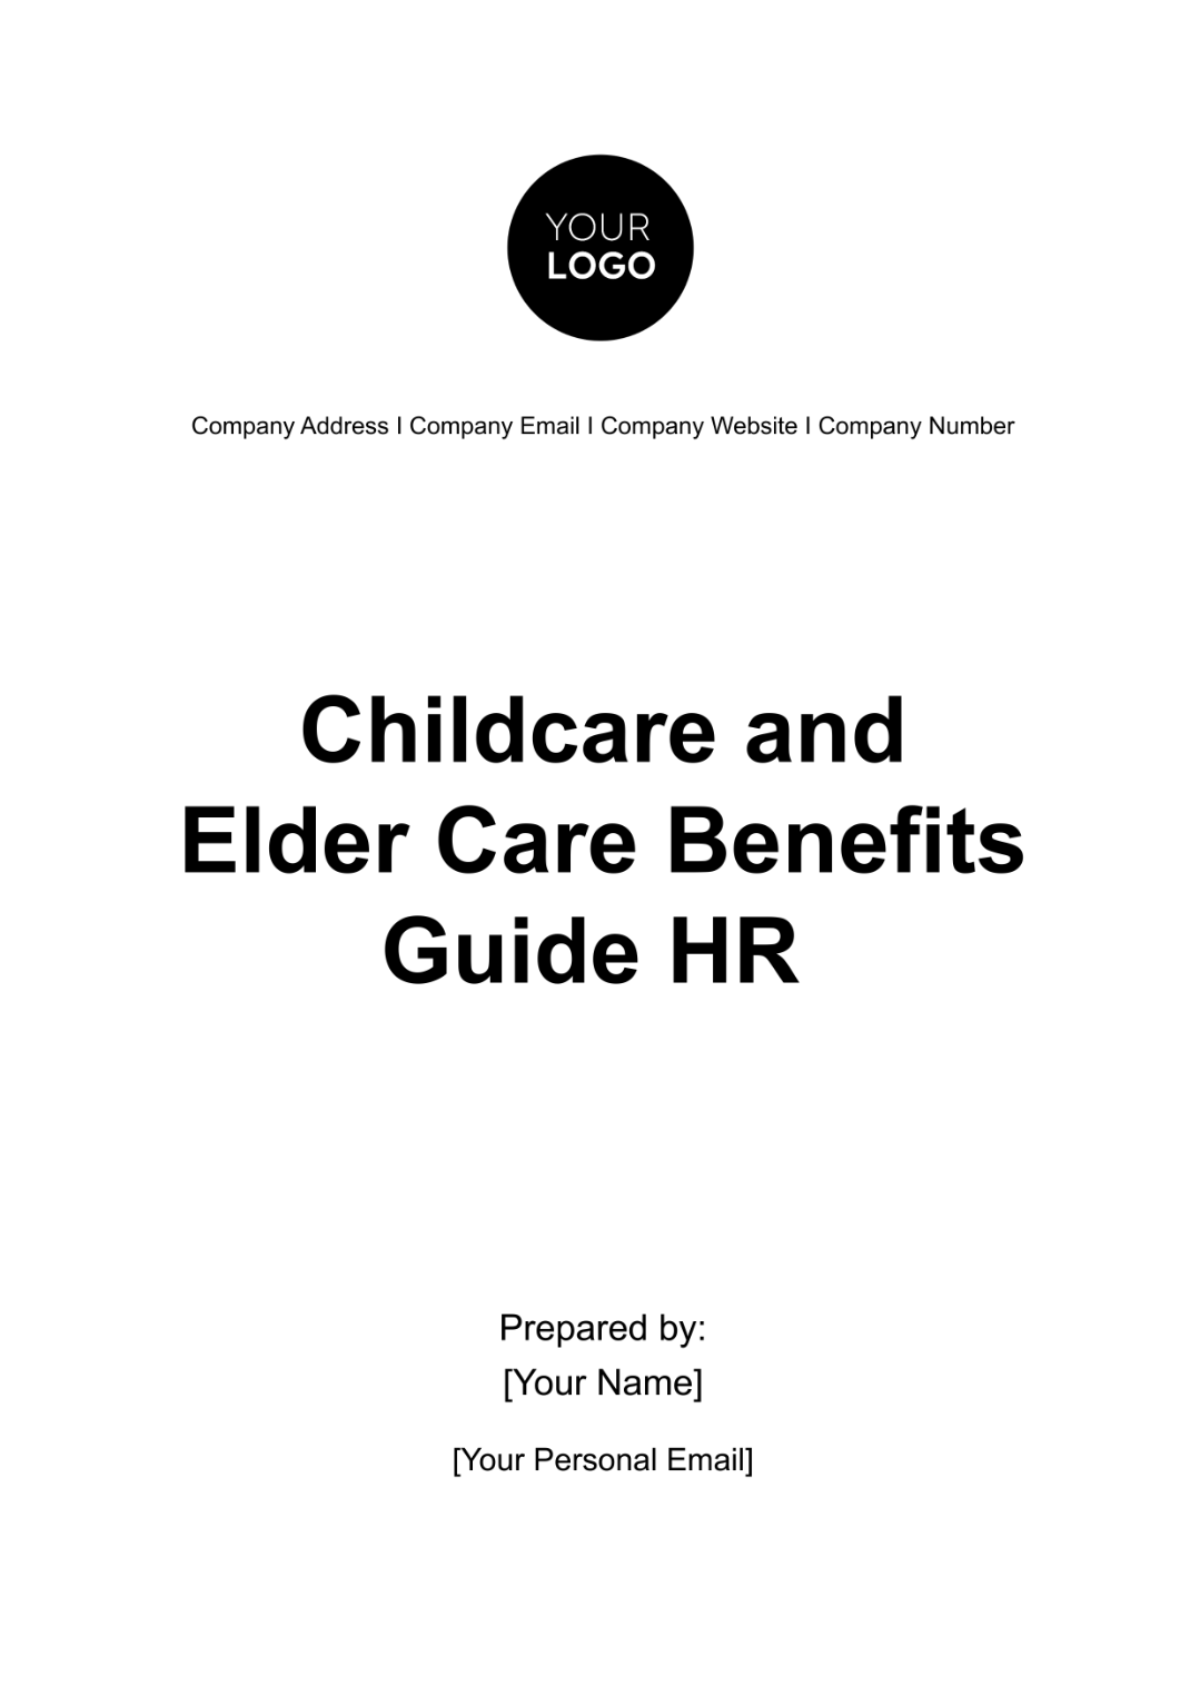 Childcare and Elder Care Benefits Guide HR Template